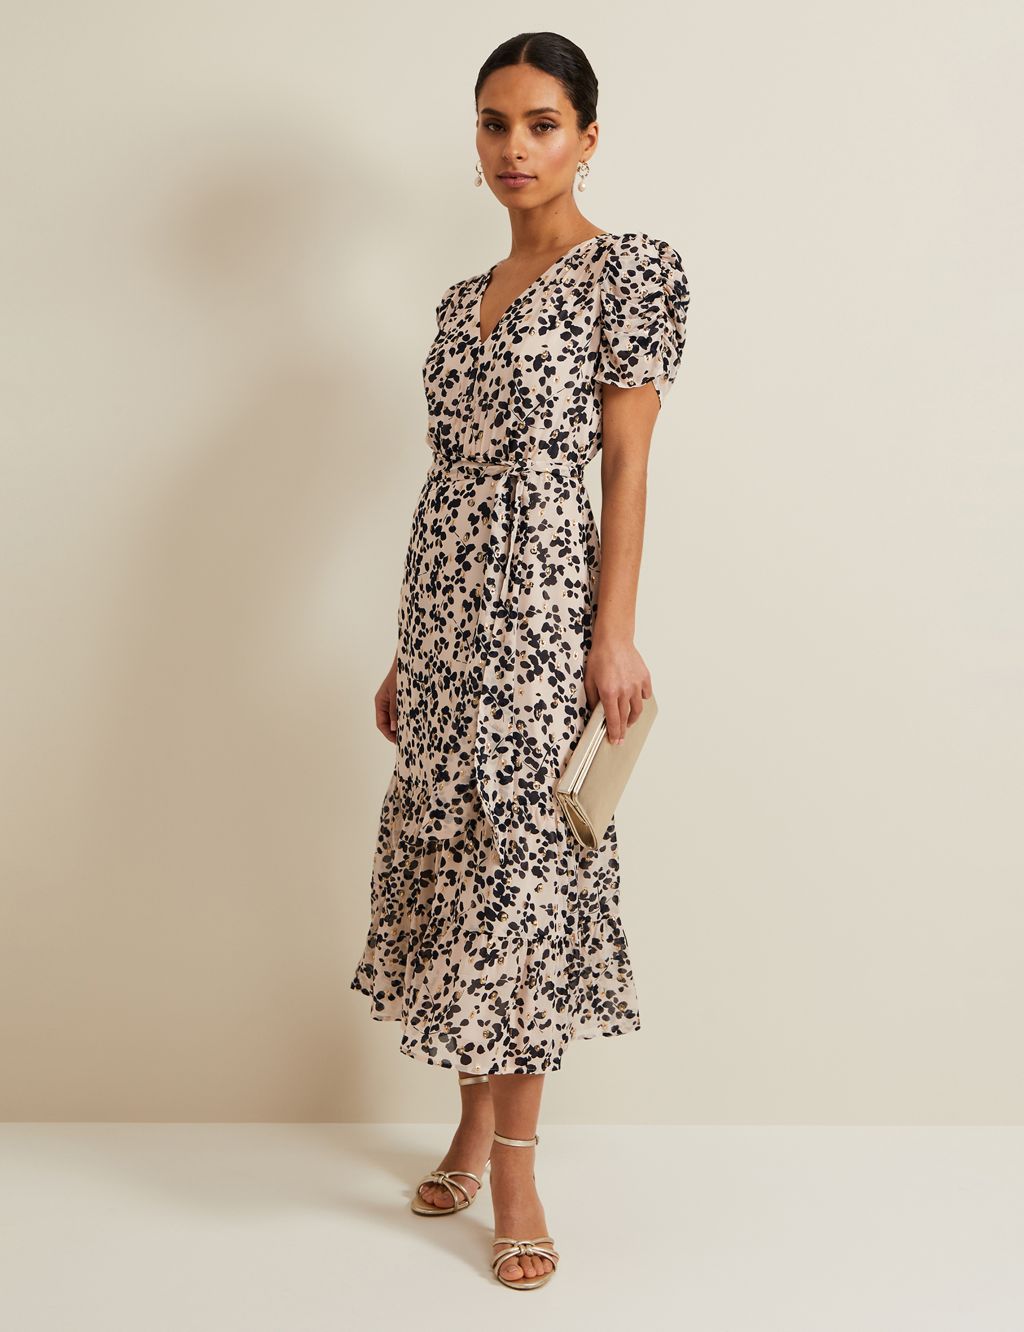 Floral Midi Shirred Dress | Phase Eight | M&S